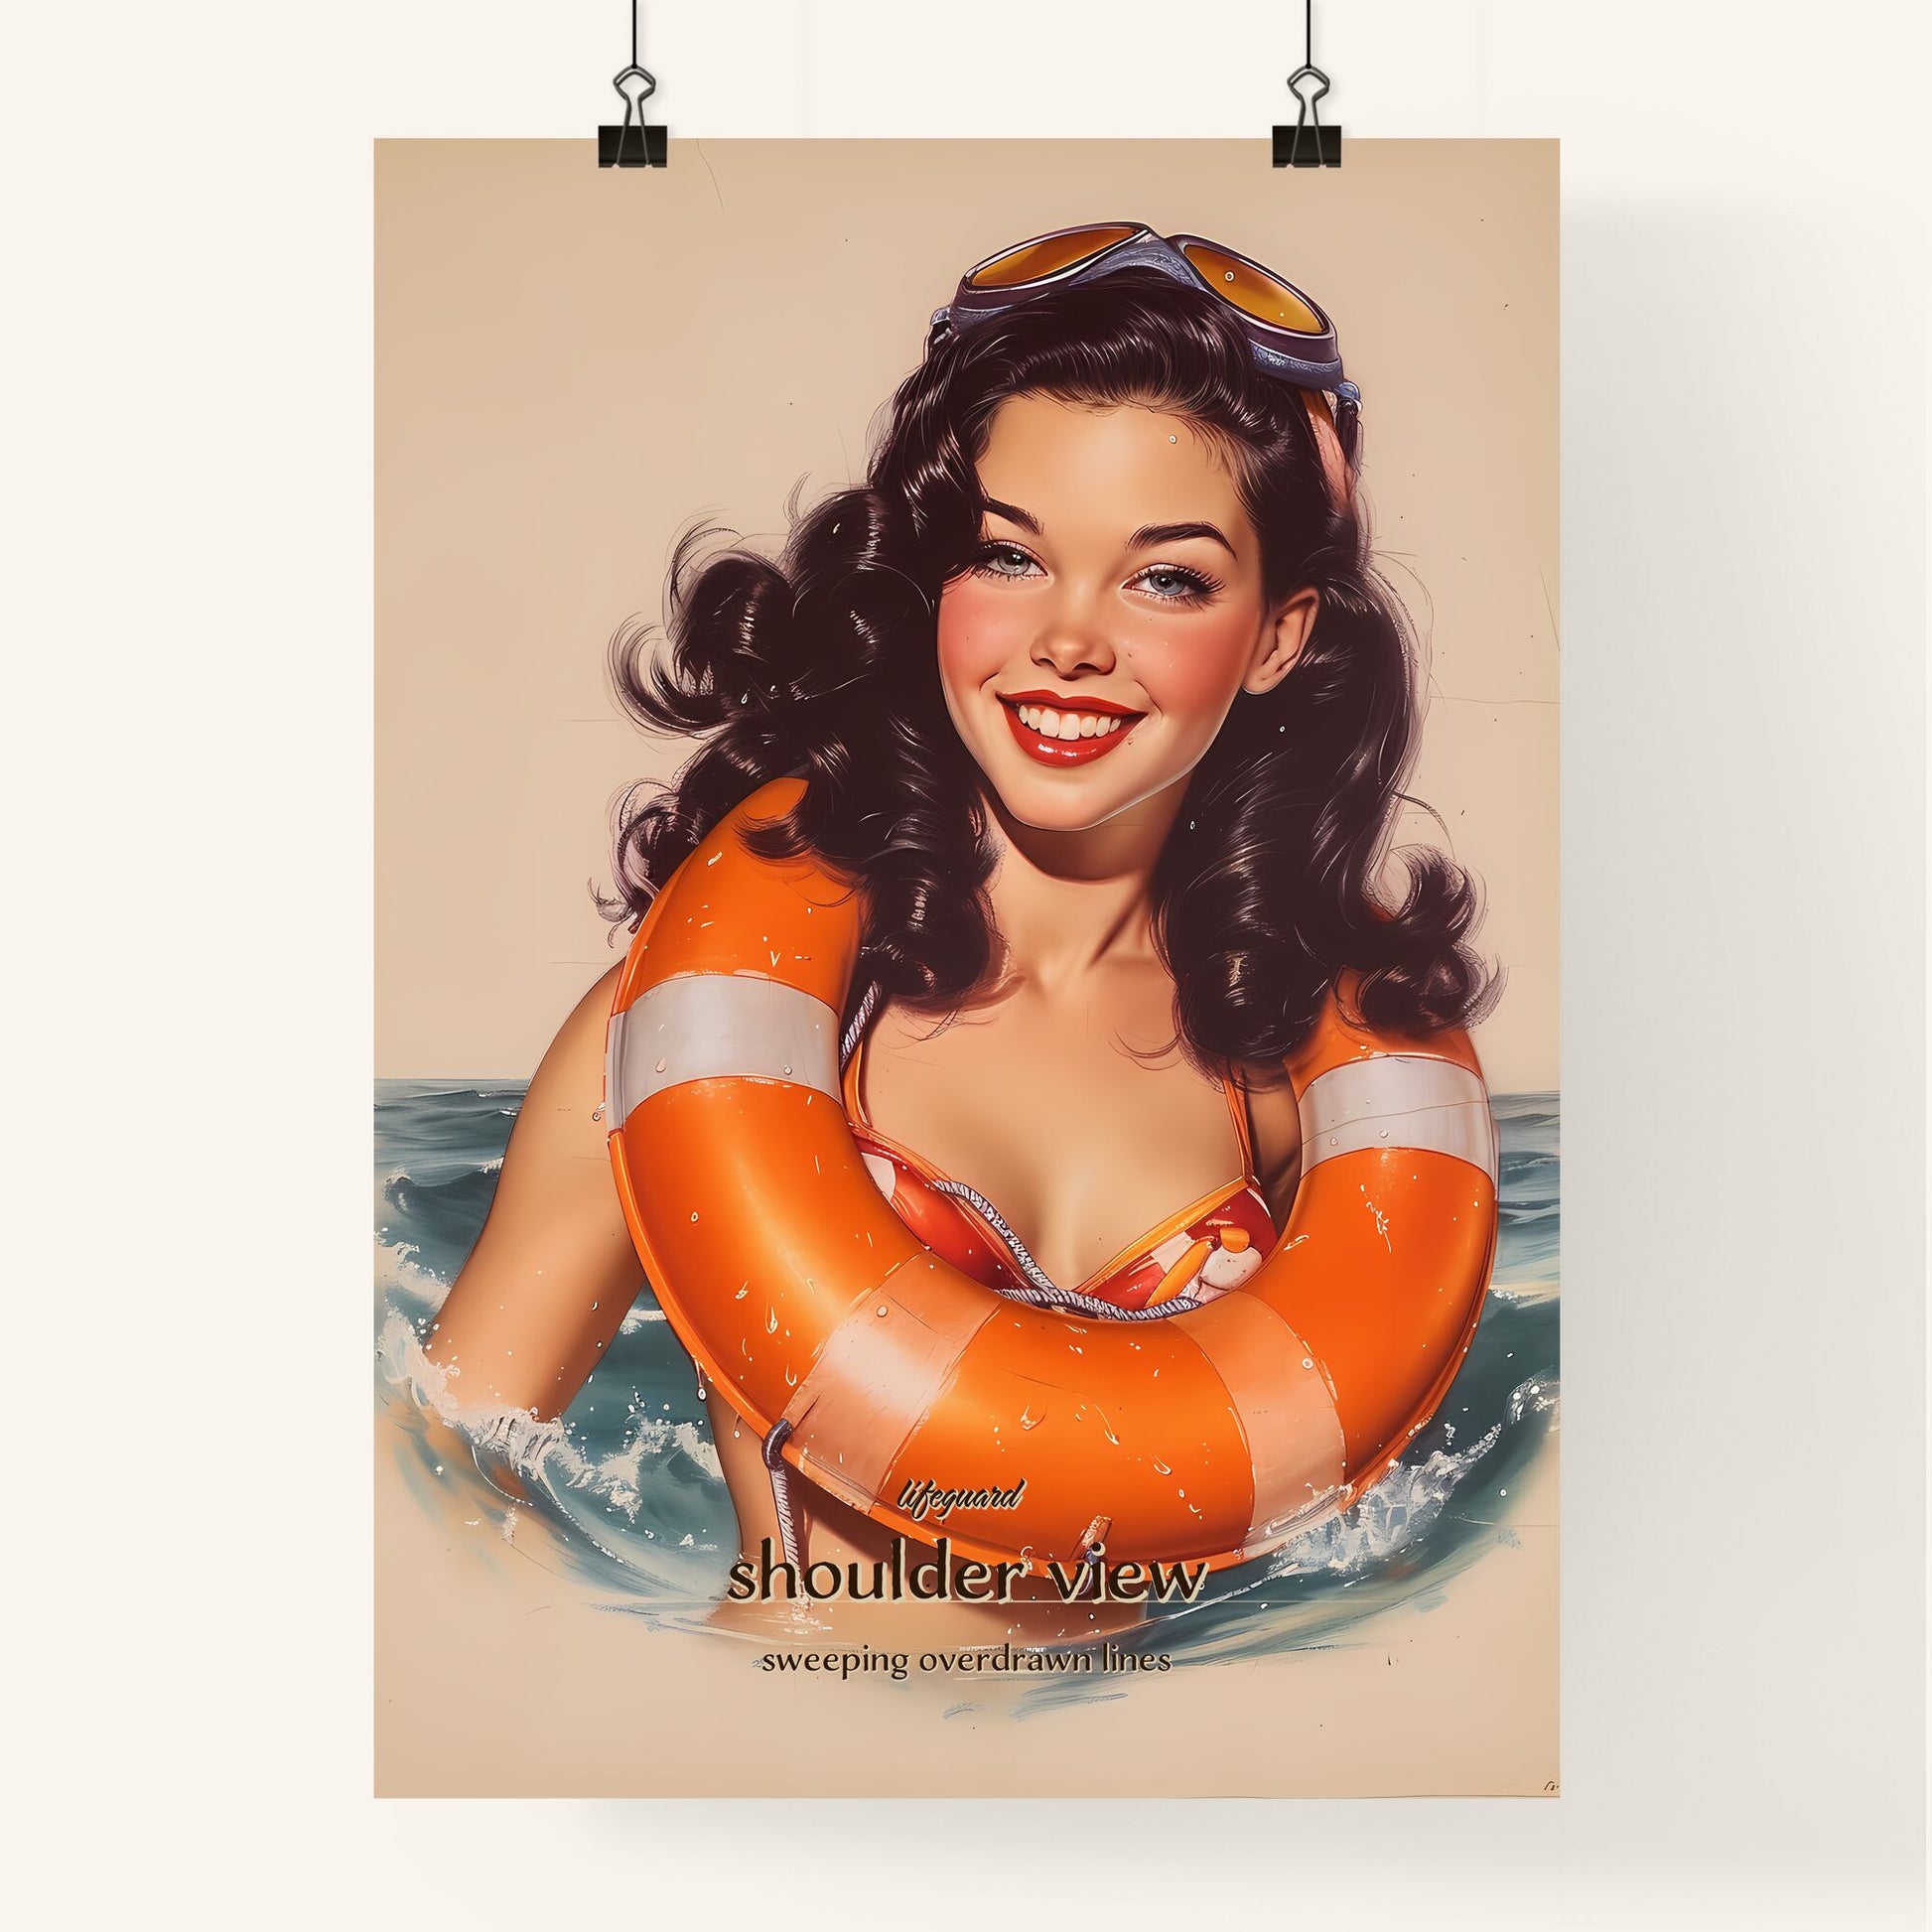 lifeguard, shoulder view, sweeping overdrawn lines, A Poster of a woman in a swimsuit with an orange life buoy Default Title